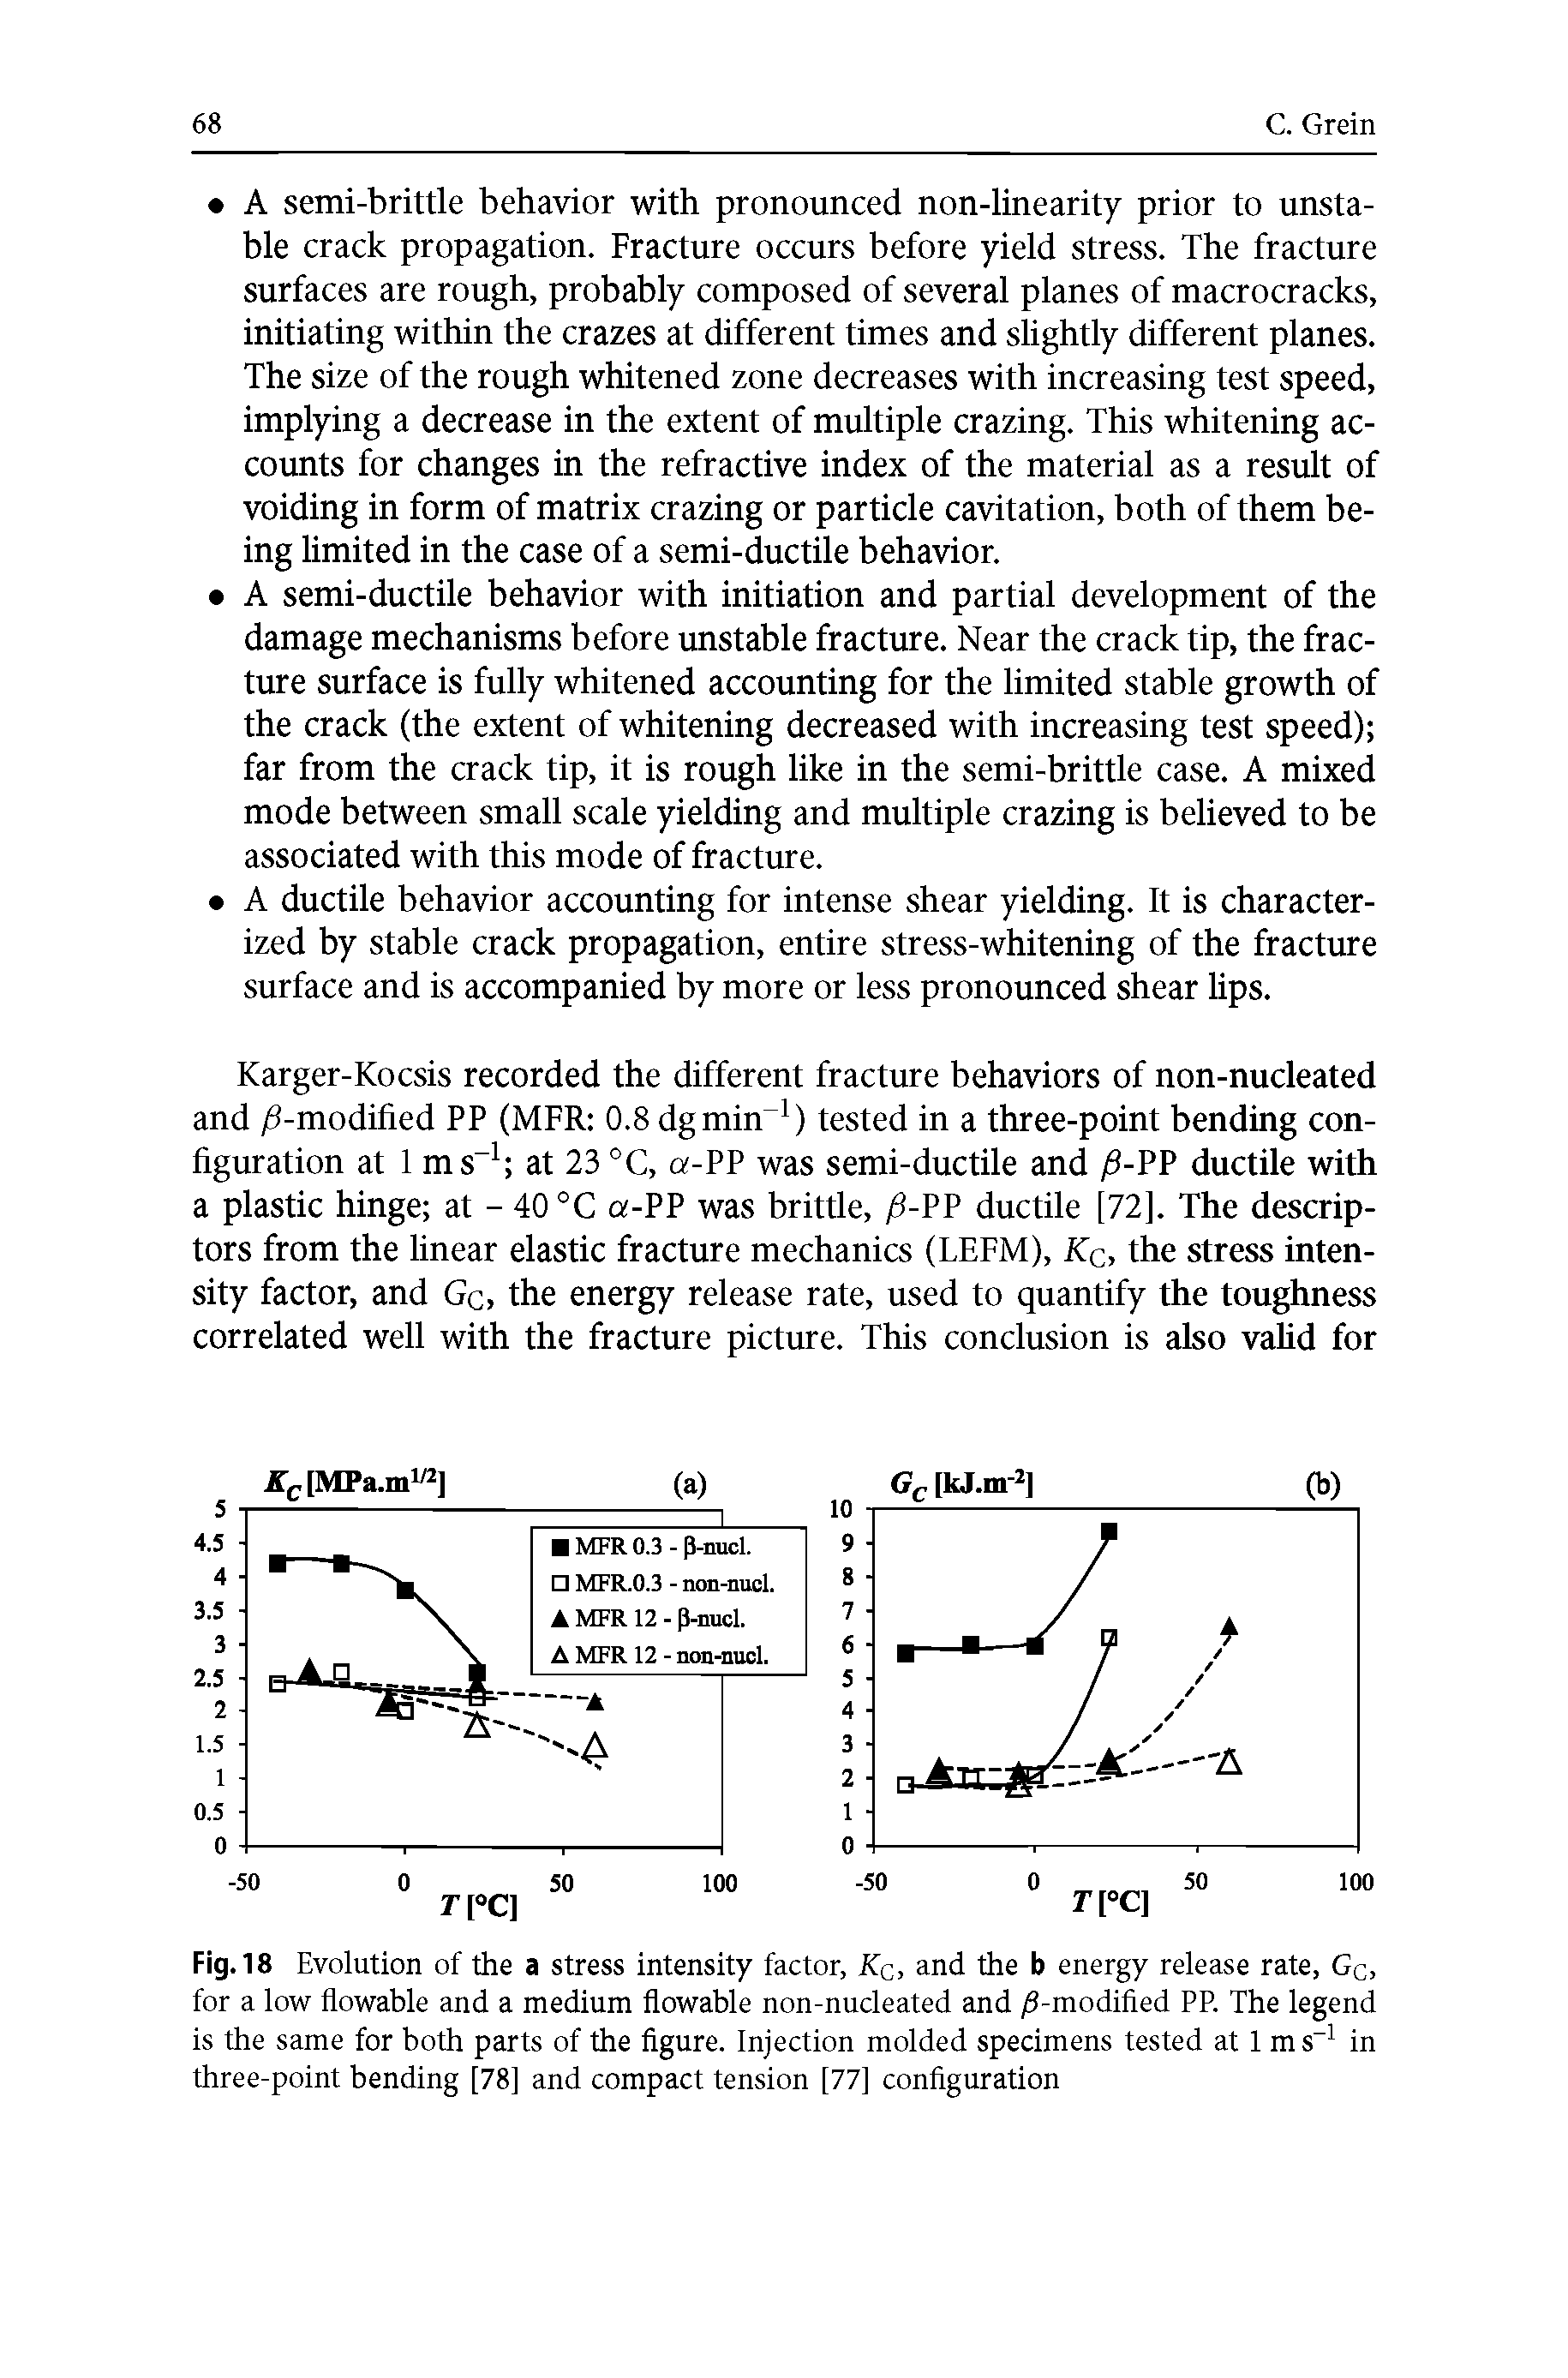 Fig. 18 Evolution of the a stress intensity factor, Kc, and the b energy release rate, Gc, for a low flowable and a medium flowable non-nucleated and /S-modified PP. The legend is the same for both parts of the figure. Injection molded specimens tested at 1 ms-1 in three-point bending [78] and compact tension [77] configuration...